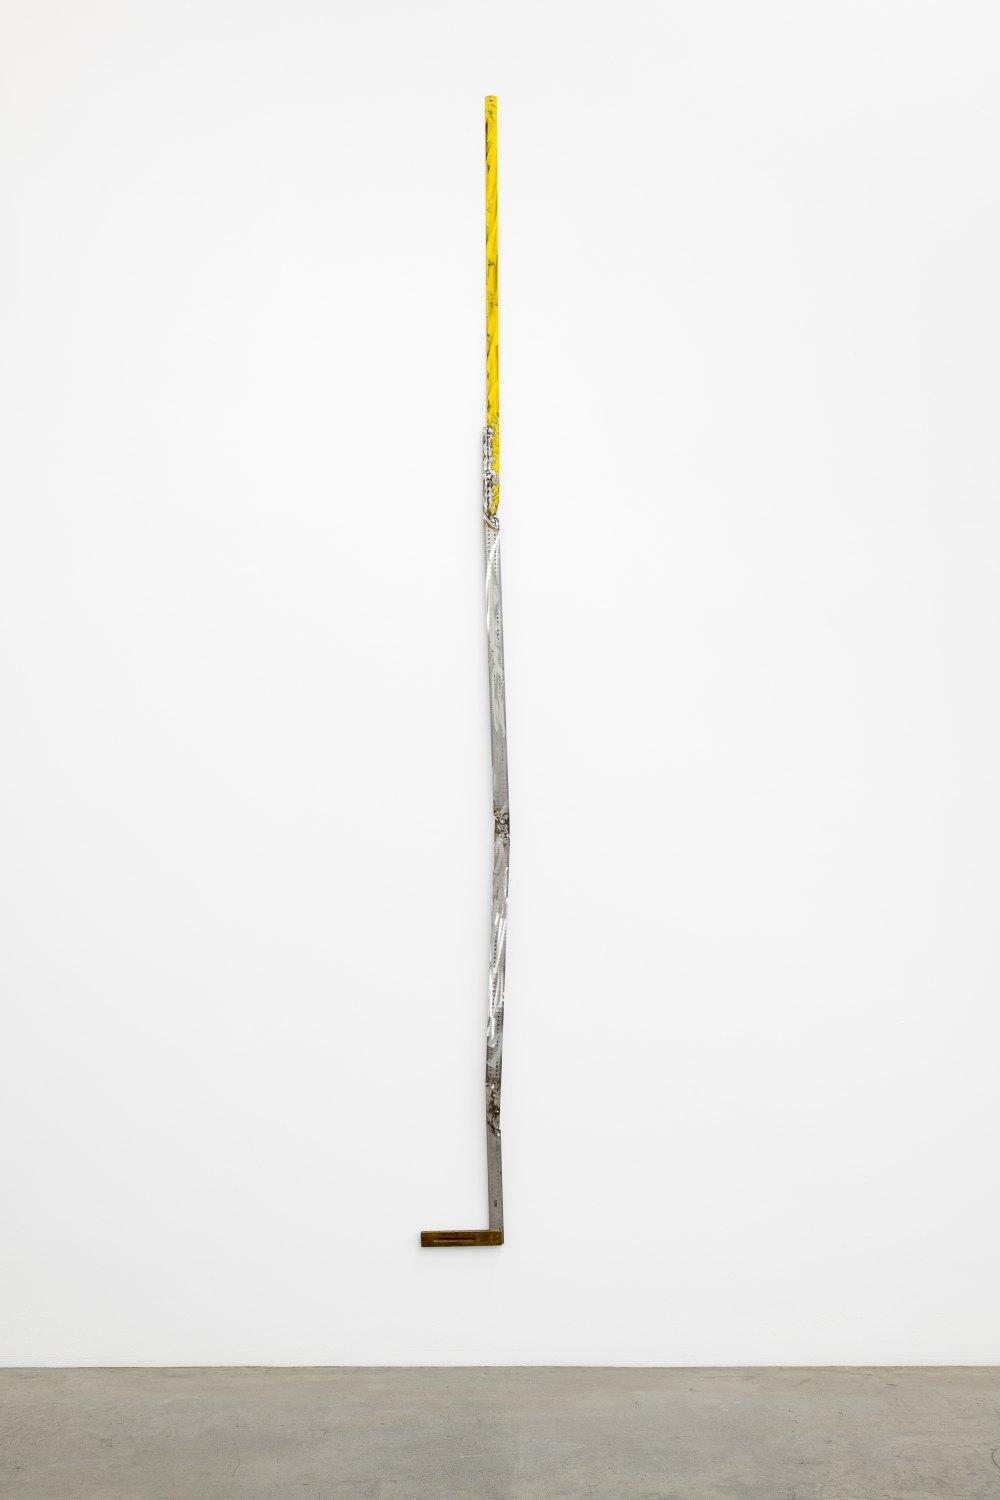 Win McCarthy Untitled (Curved Angle), 2021 Welded stainless steel rulers, and right angle 275 x 20 cm